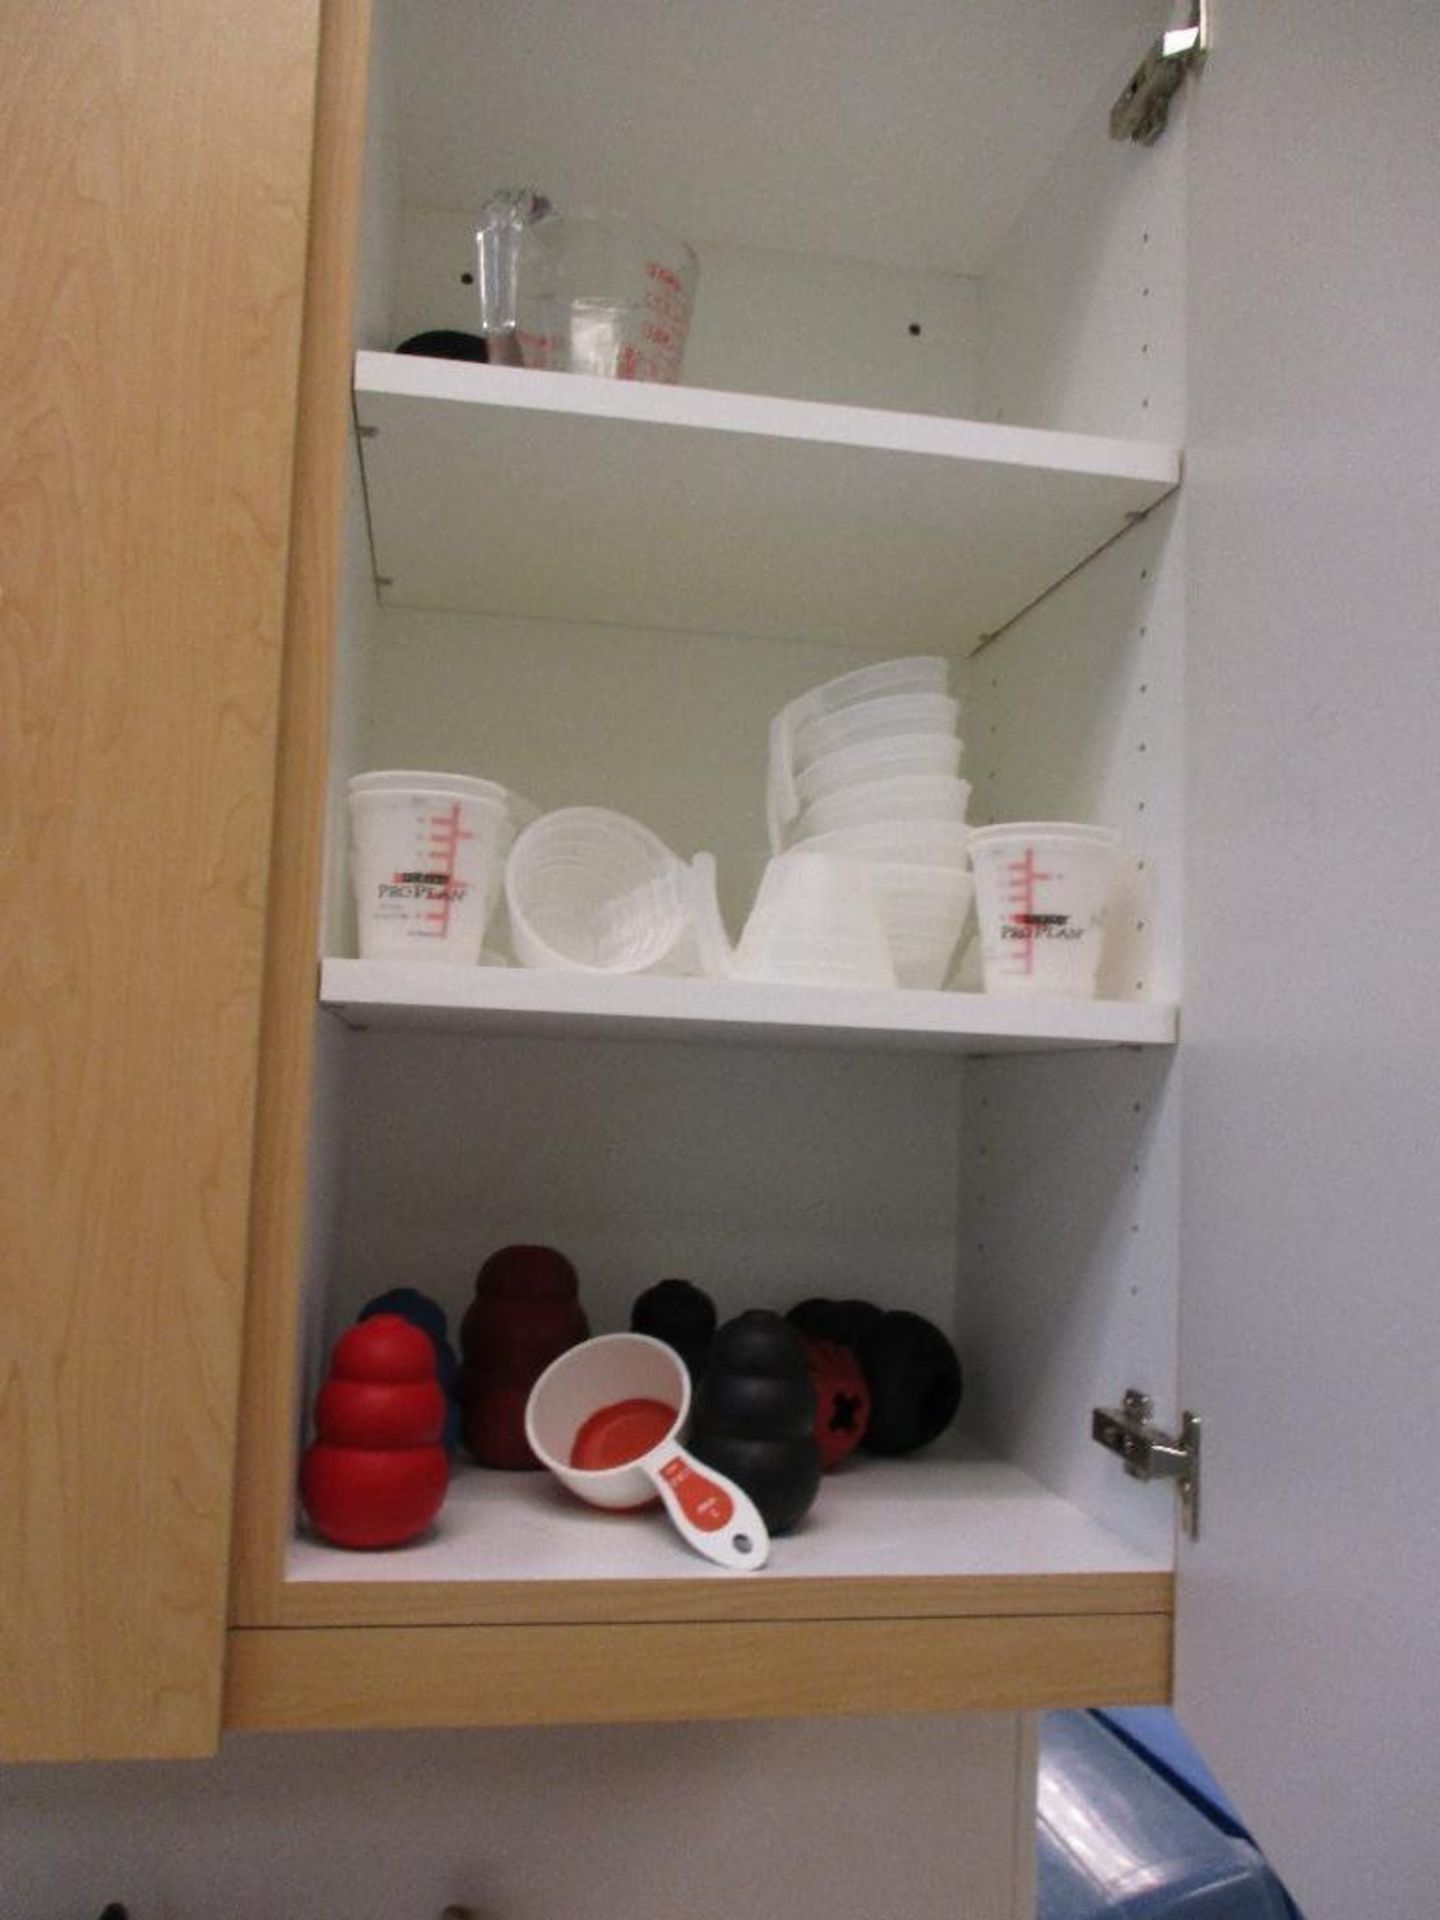 Contents of all cabinets and counters in this area and Large sink( disconnect water and cap to code) - Image 10 of 15